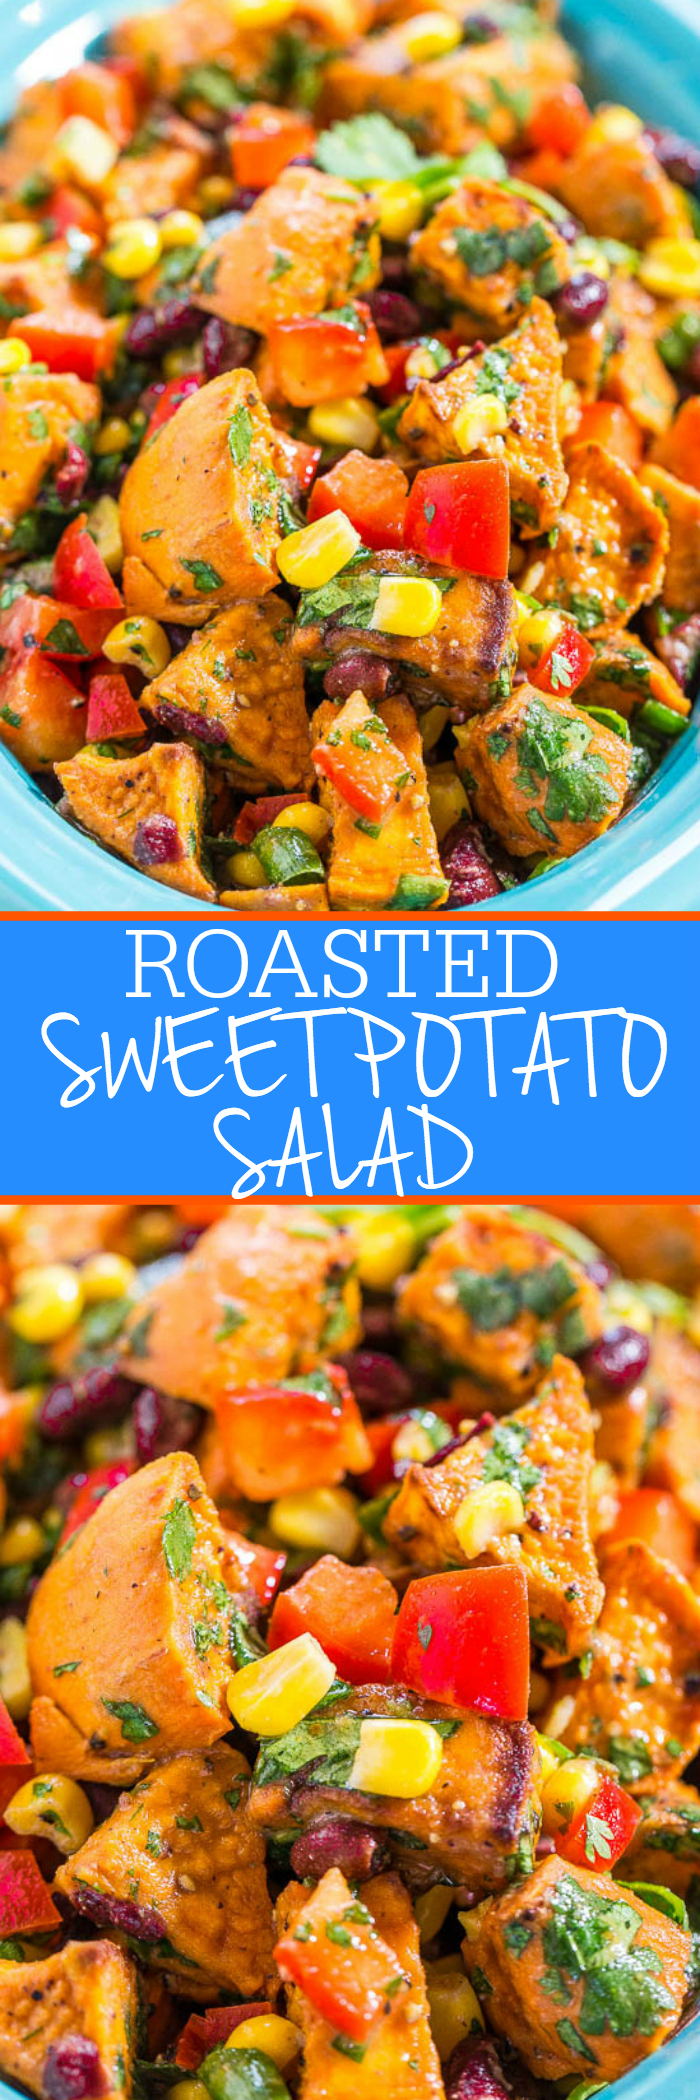 Roasted Sweet Potato Salad - Goodbye mayo-loaded, mushy, boring potato salad. Hello to a Mexican-inspired potato salad full of flavor and texture with corn, black beans, peppers, and cilantro!! (Great for outdoor events and lunchboxes because there's no mayo!)